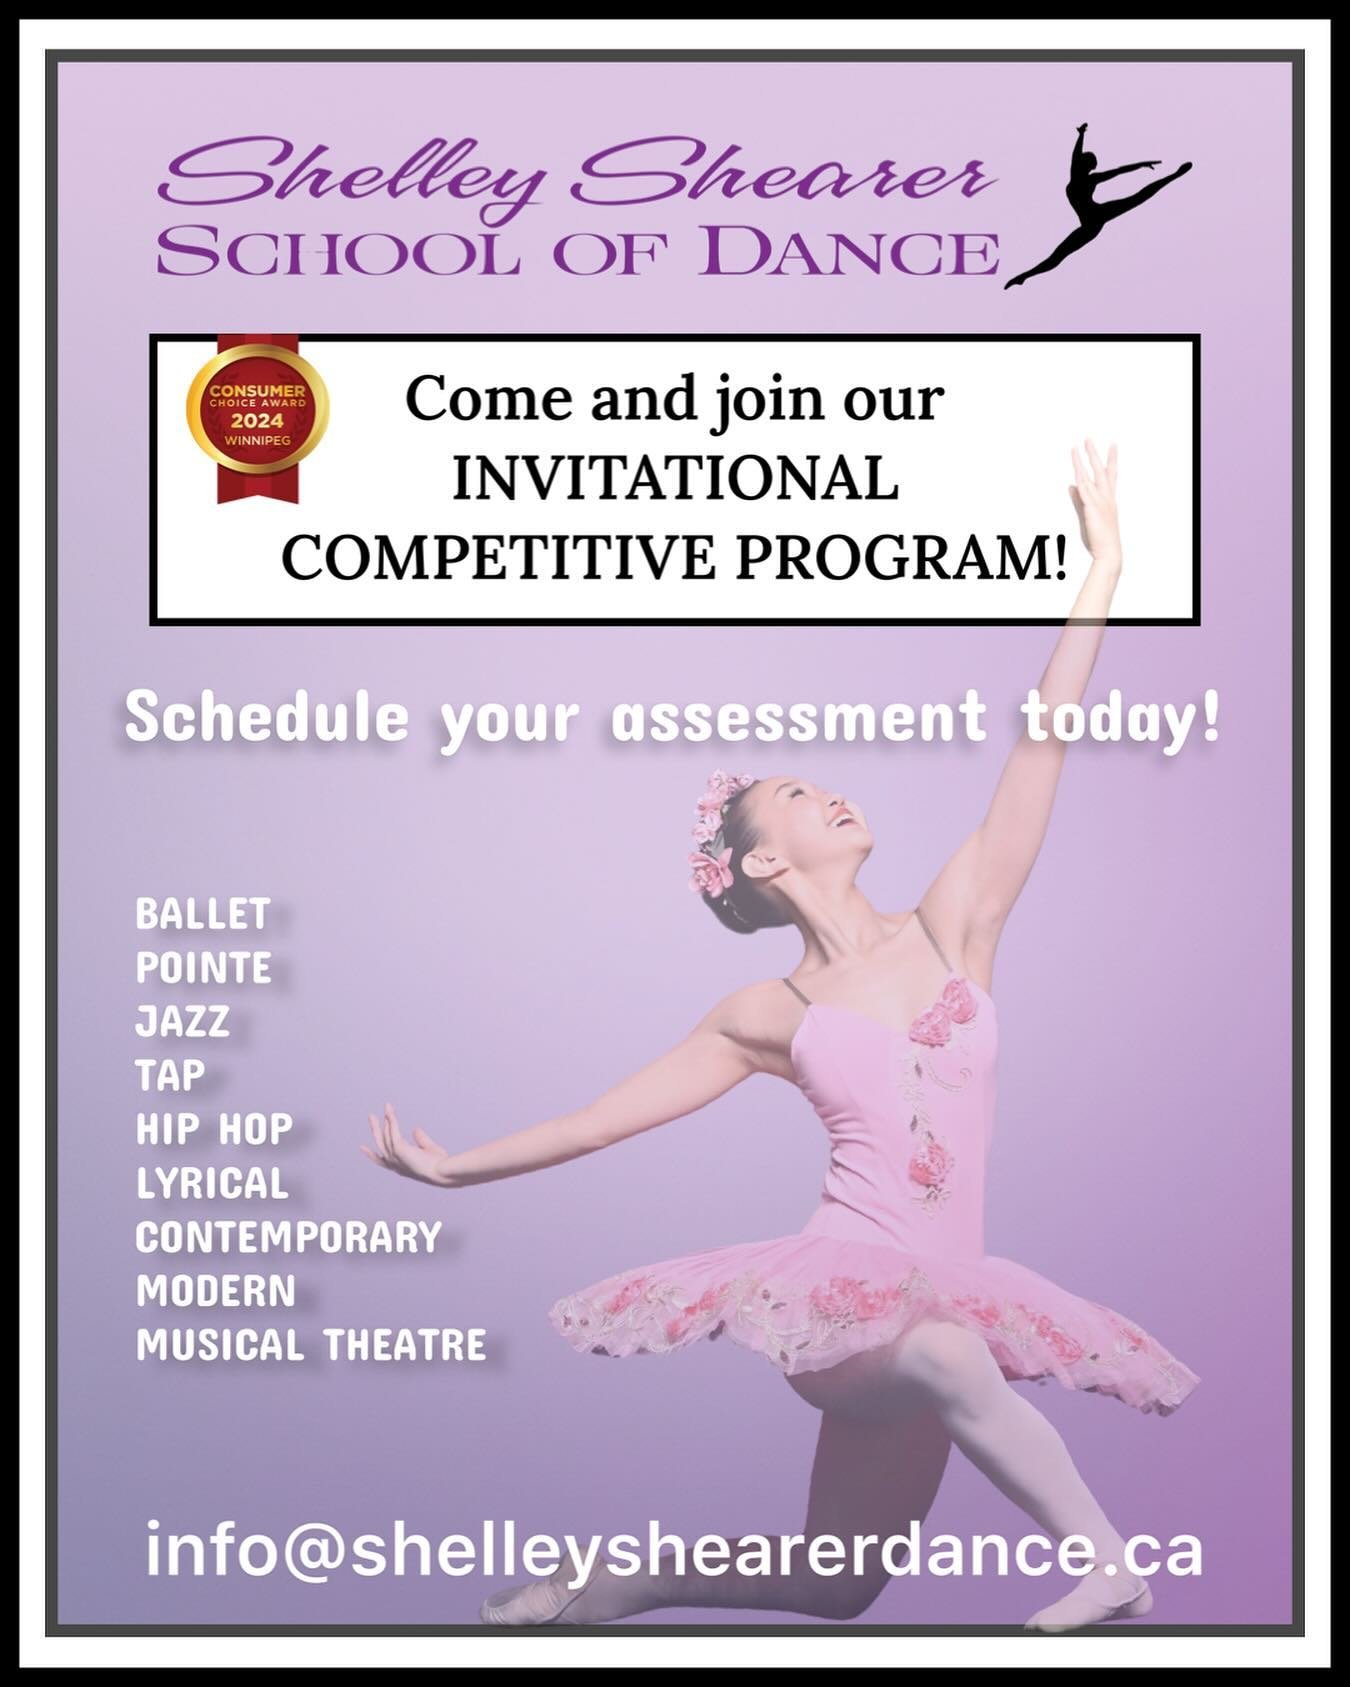 Come and join our SSSOD Invitational Competitive team!

🌟⭐️🌟⭐️🌟⭐️🌟⭐️🌟⭐️🌟⭐️🌟⭐️

Our Invitational Competitive Dance Program is designed for students who have the requisite skills and interest, in more intensive training and competing. 

New stud